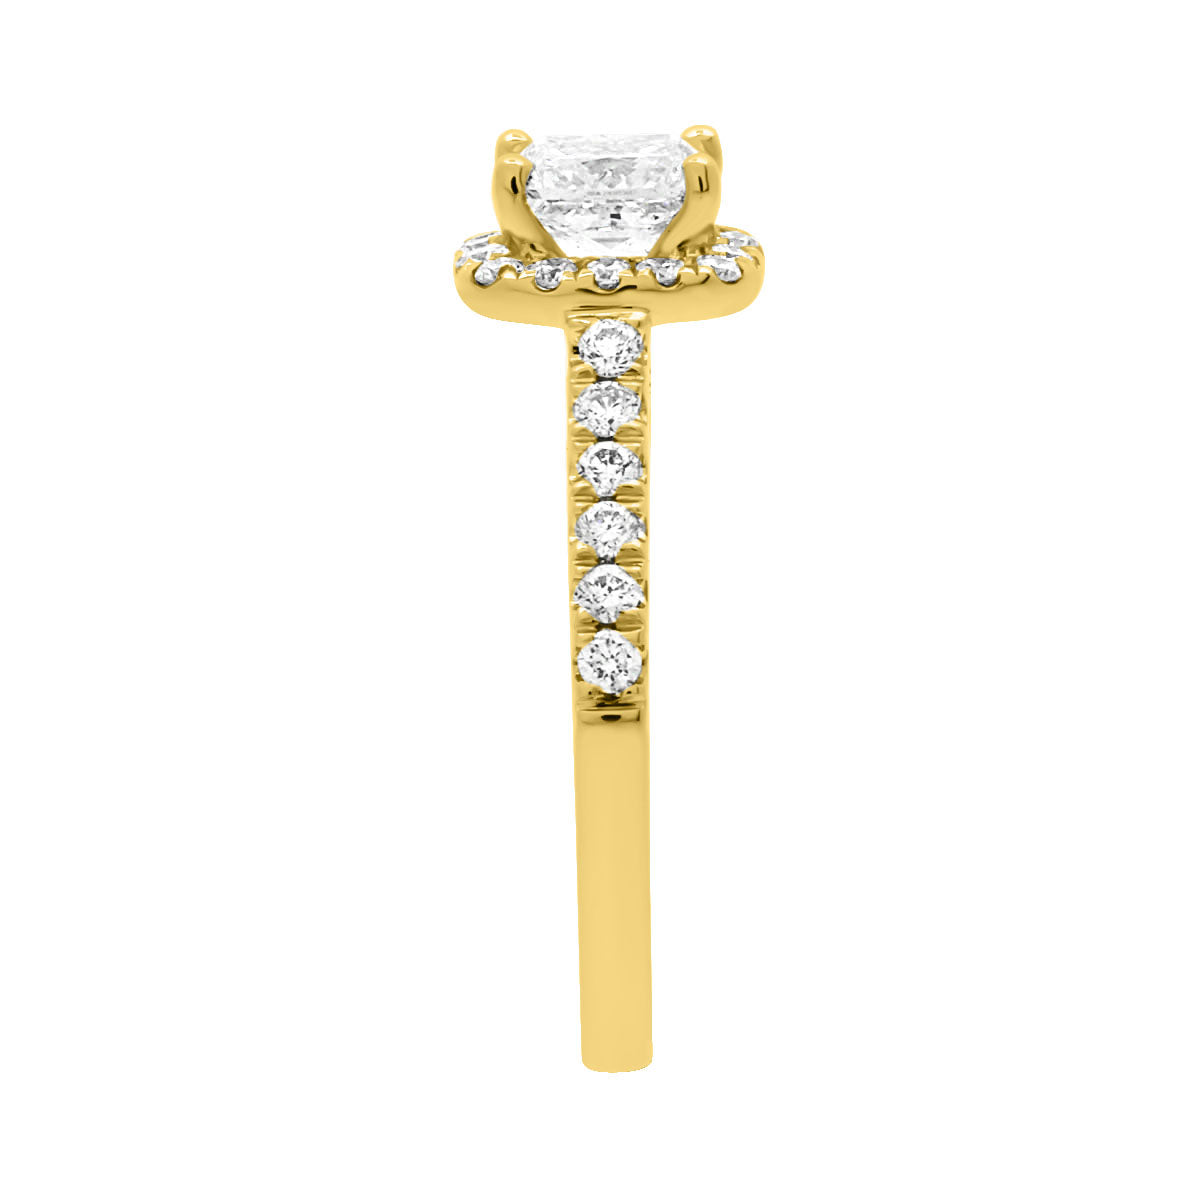 Princess Cut Diamond Halo Ring in yellow gold standing upright and viewed from the side